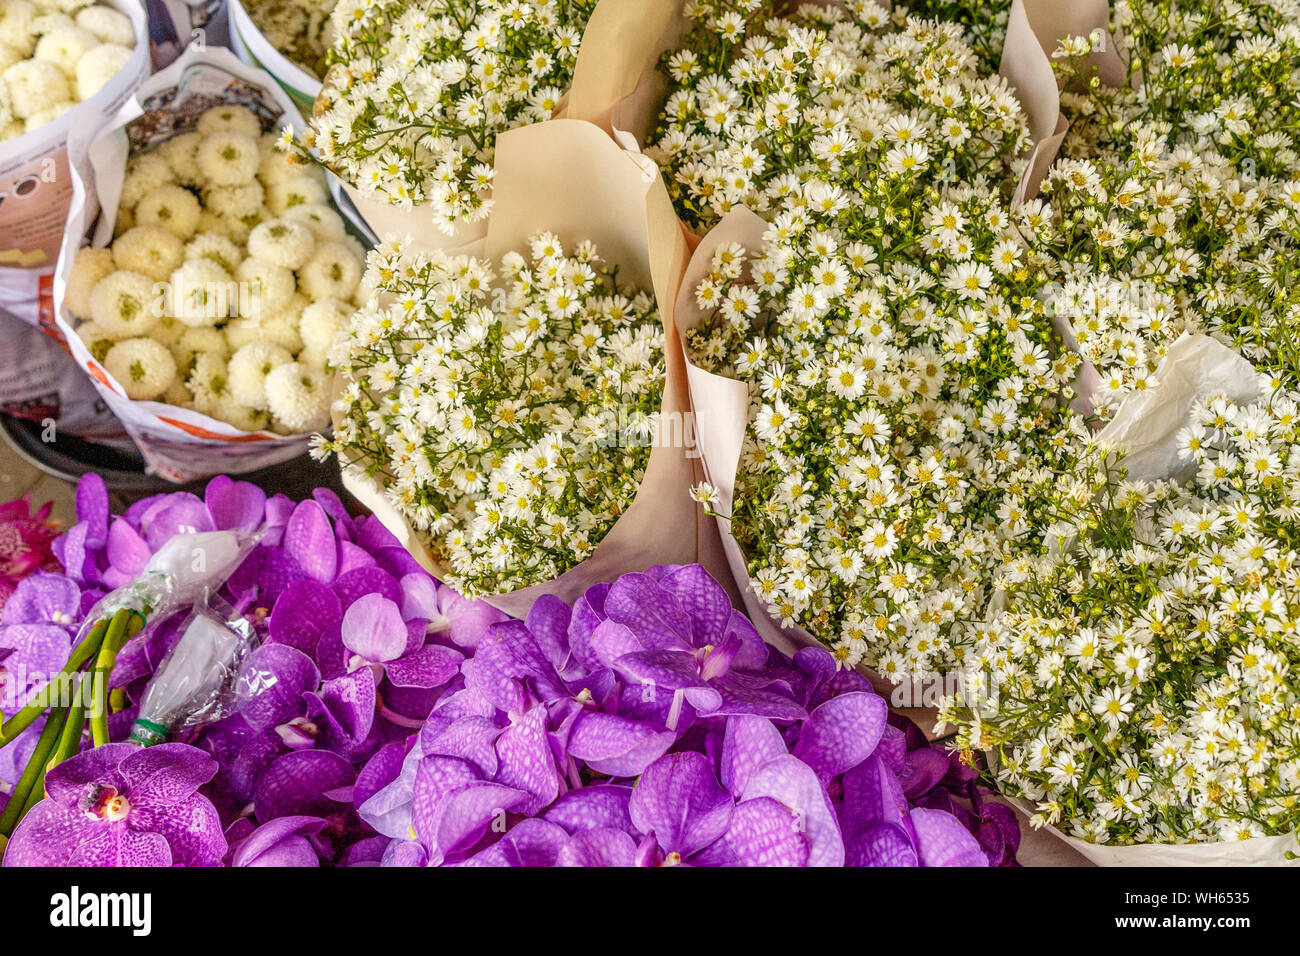 Bouquets of white aster flowers and purple orchids at Pak Khlong Talat, famous flower market in Bangkok, Thailand. Stock Photo